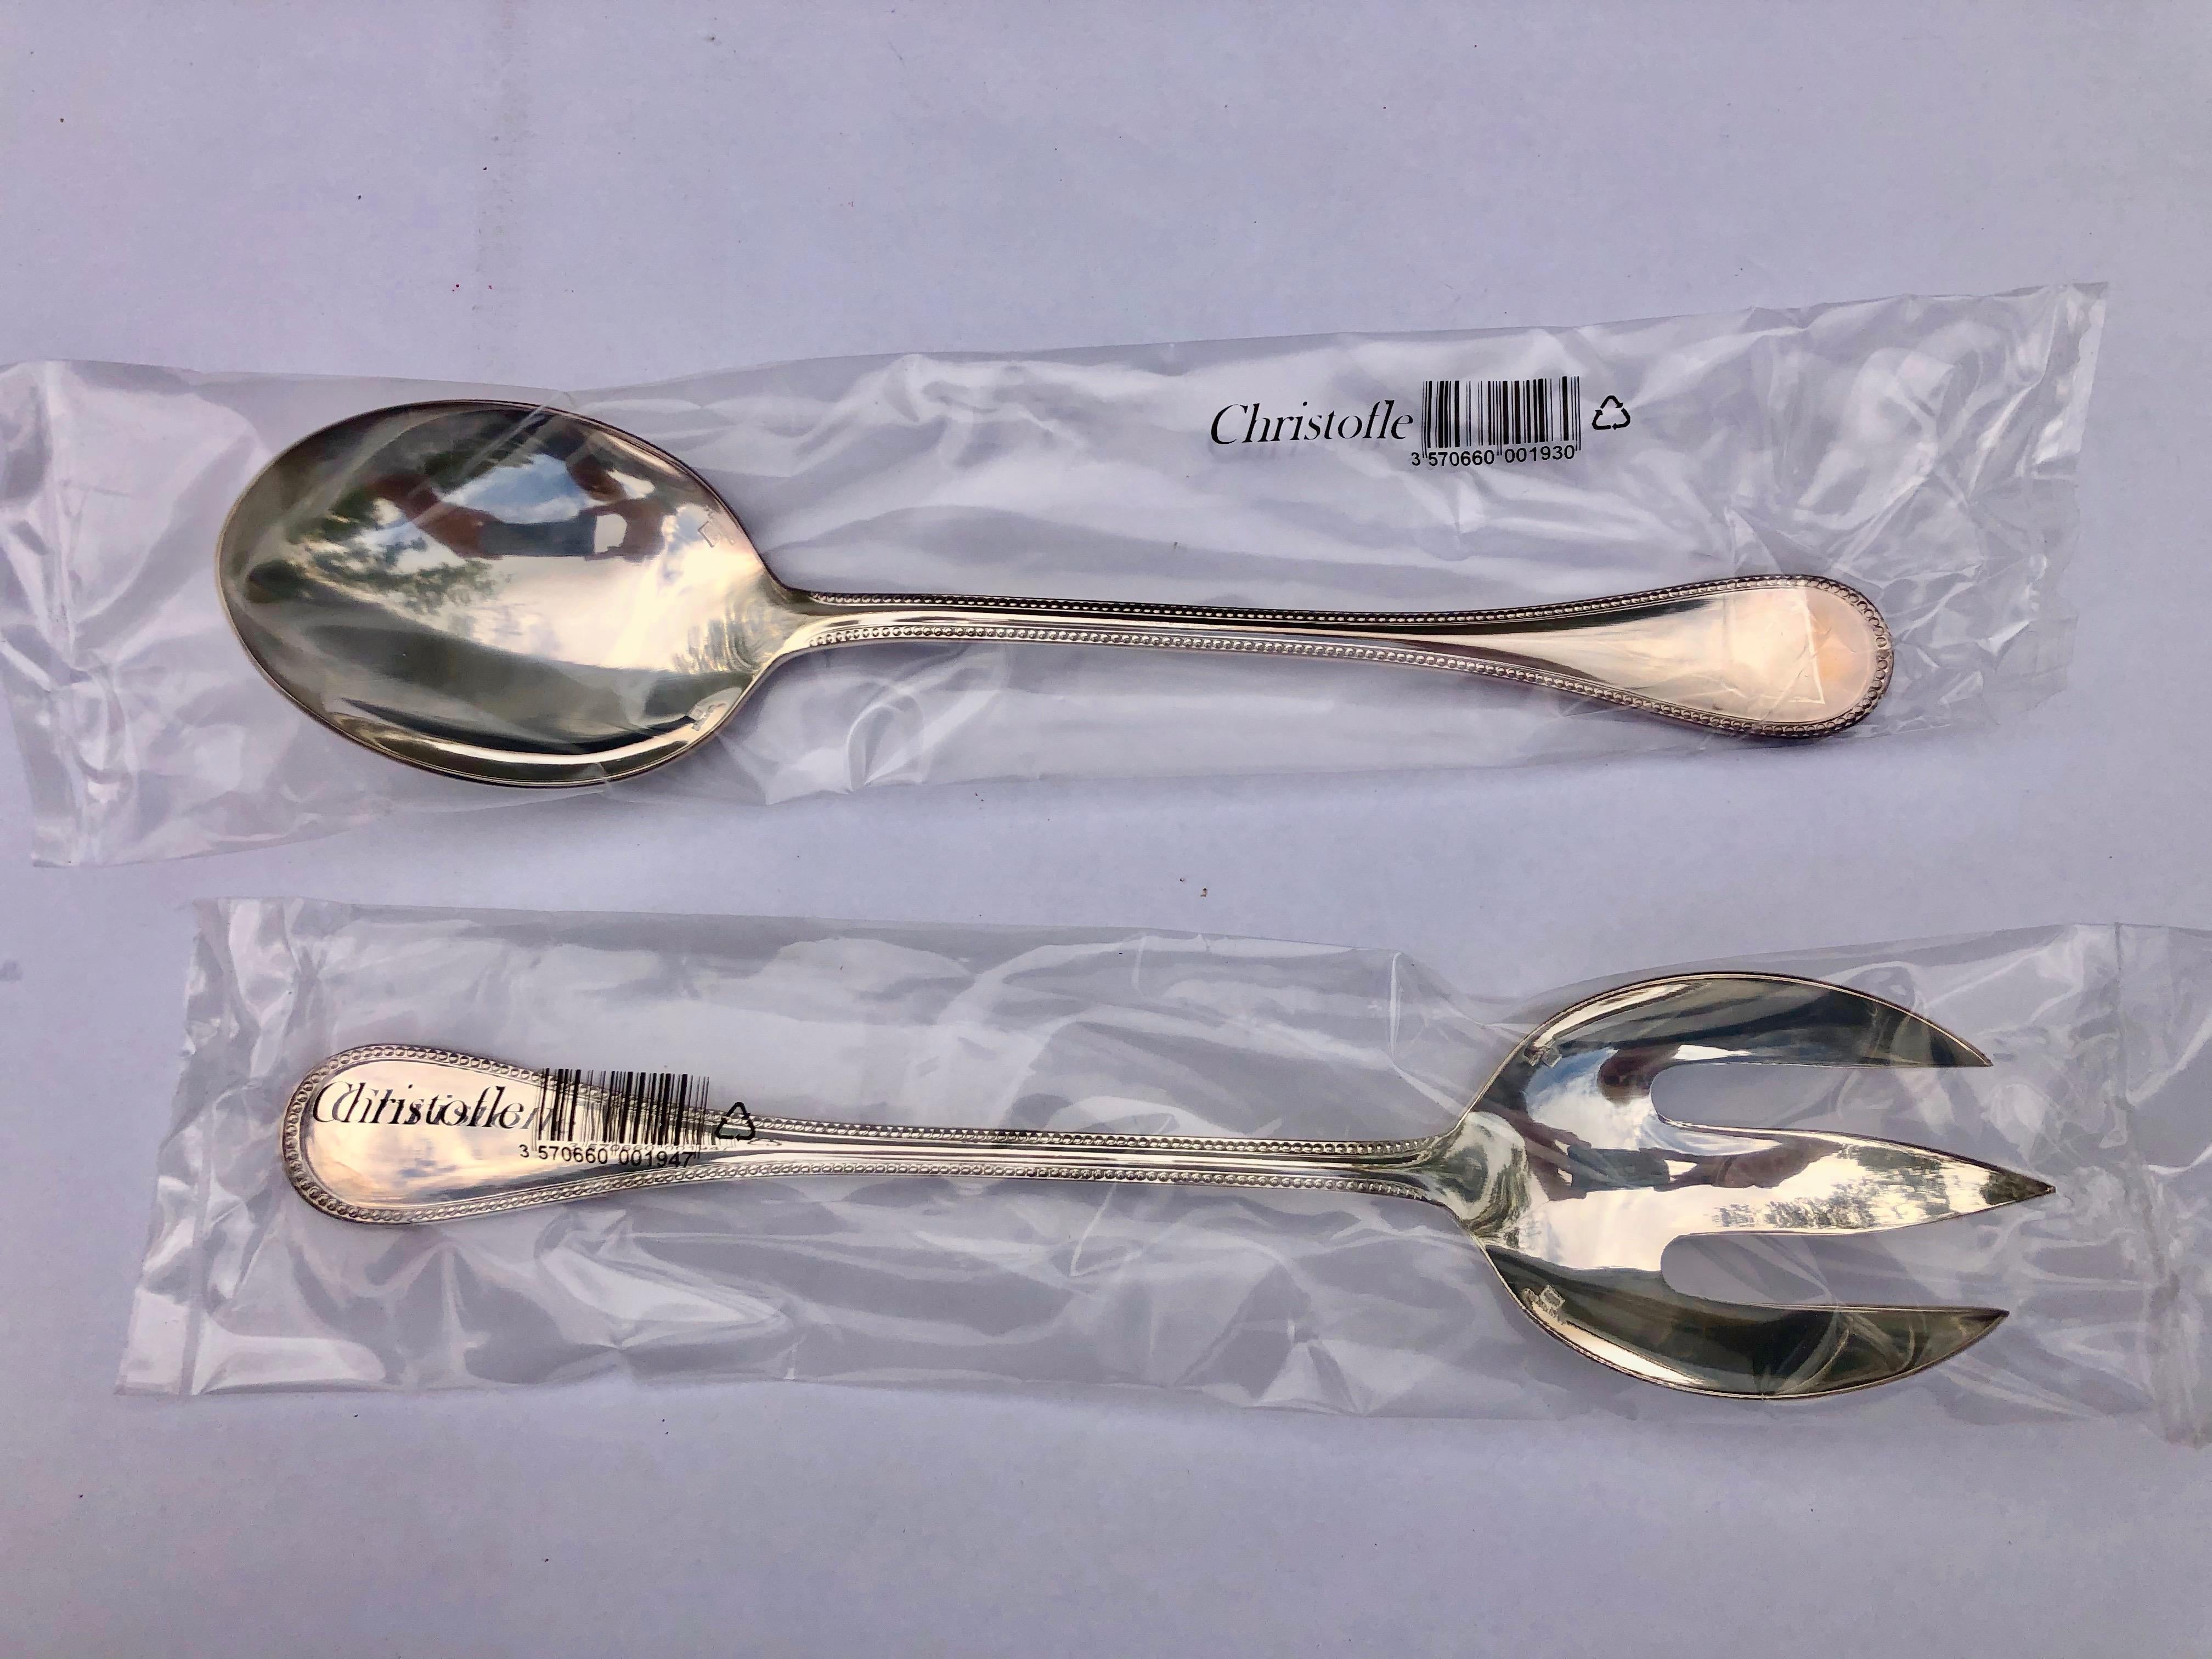 Modern Christofle Set of 2 Silver Plated Salad Serving Spoon and Fork Perles New in Box For Sale